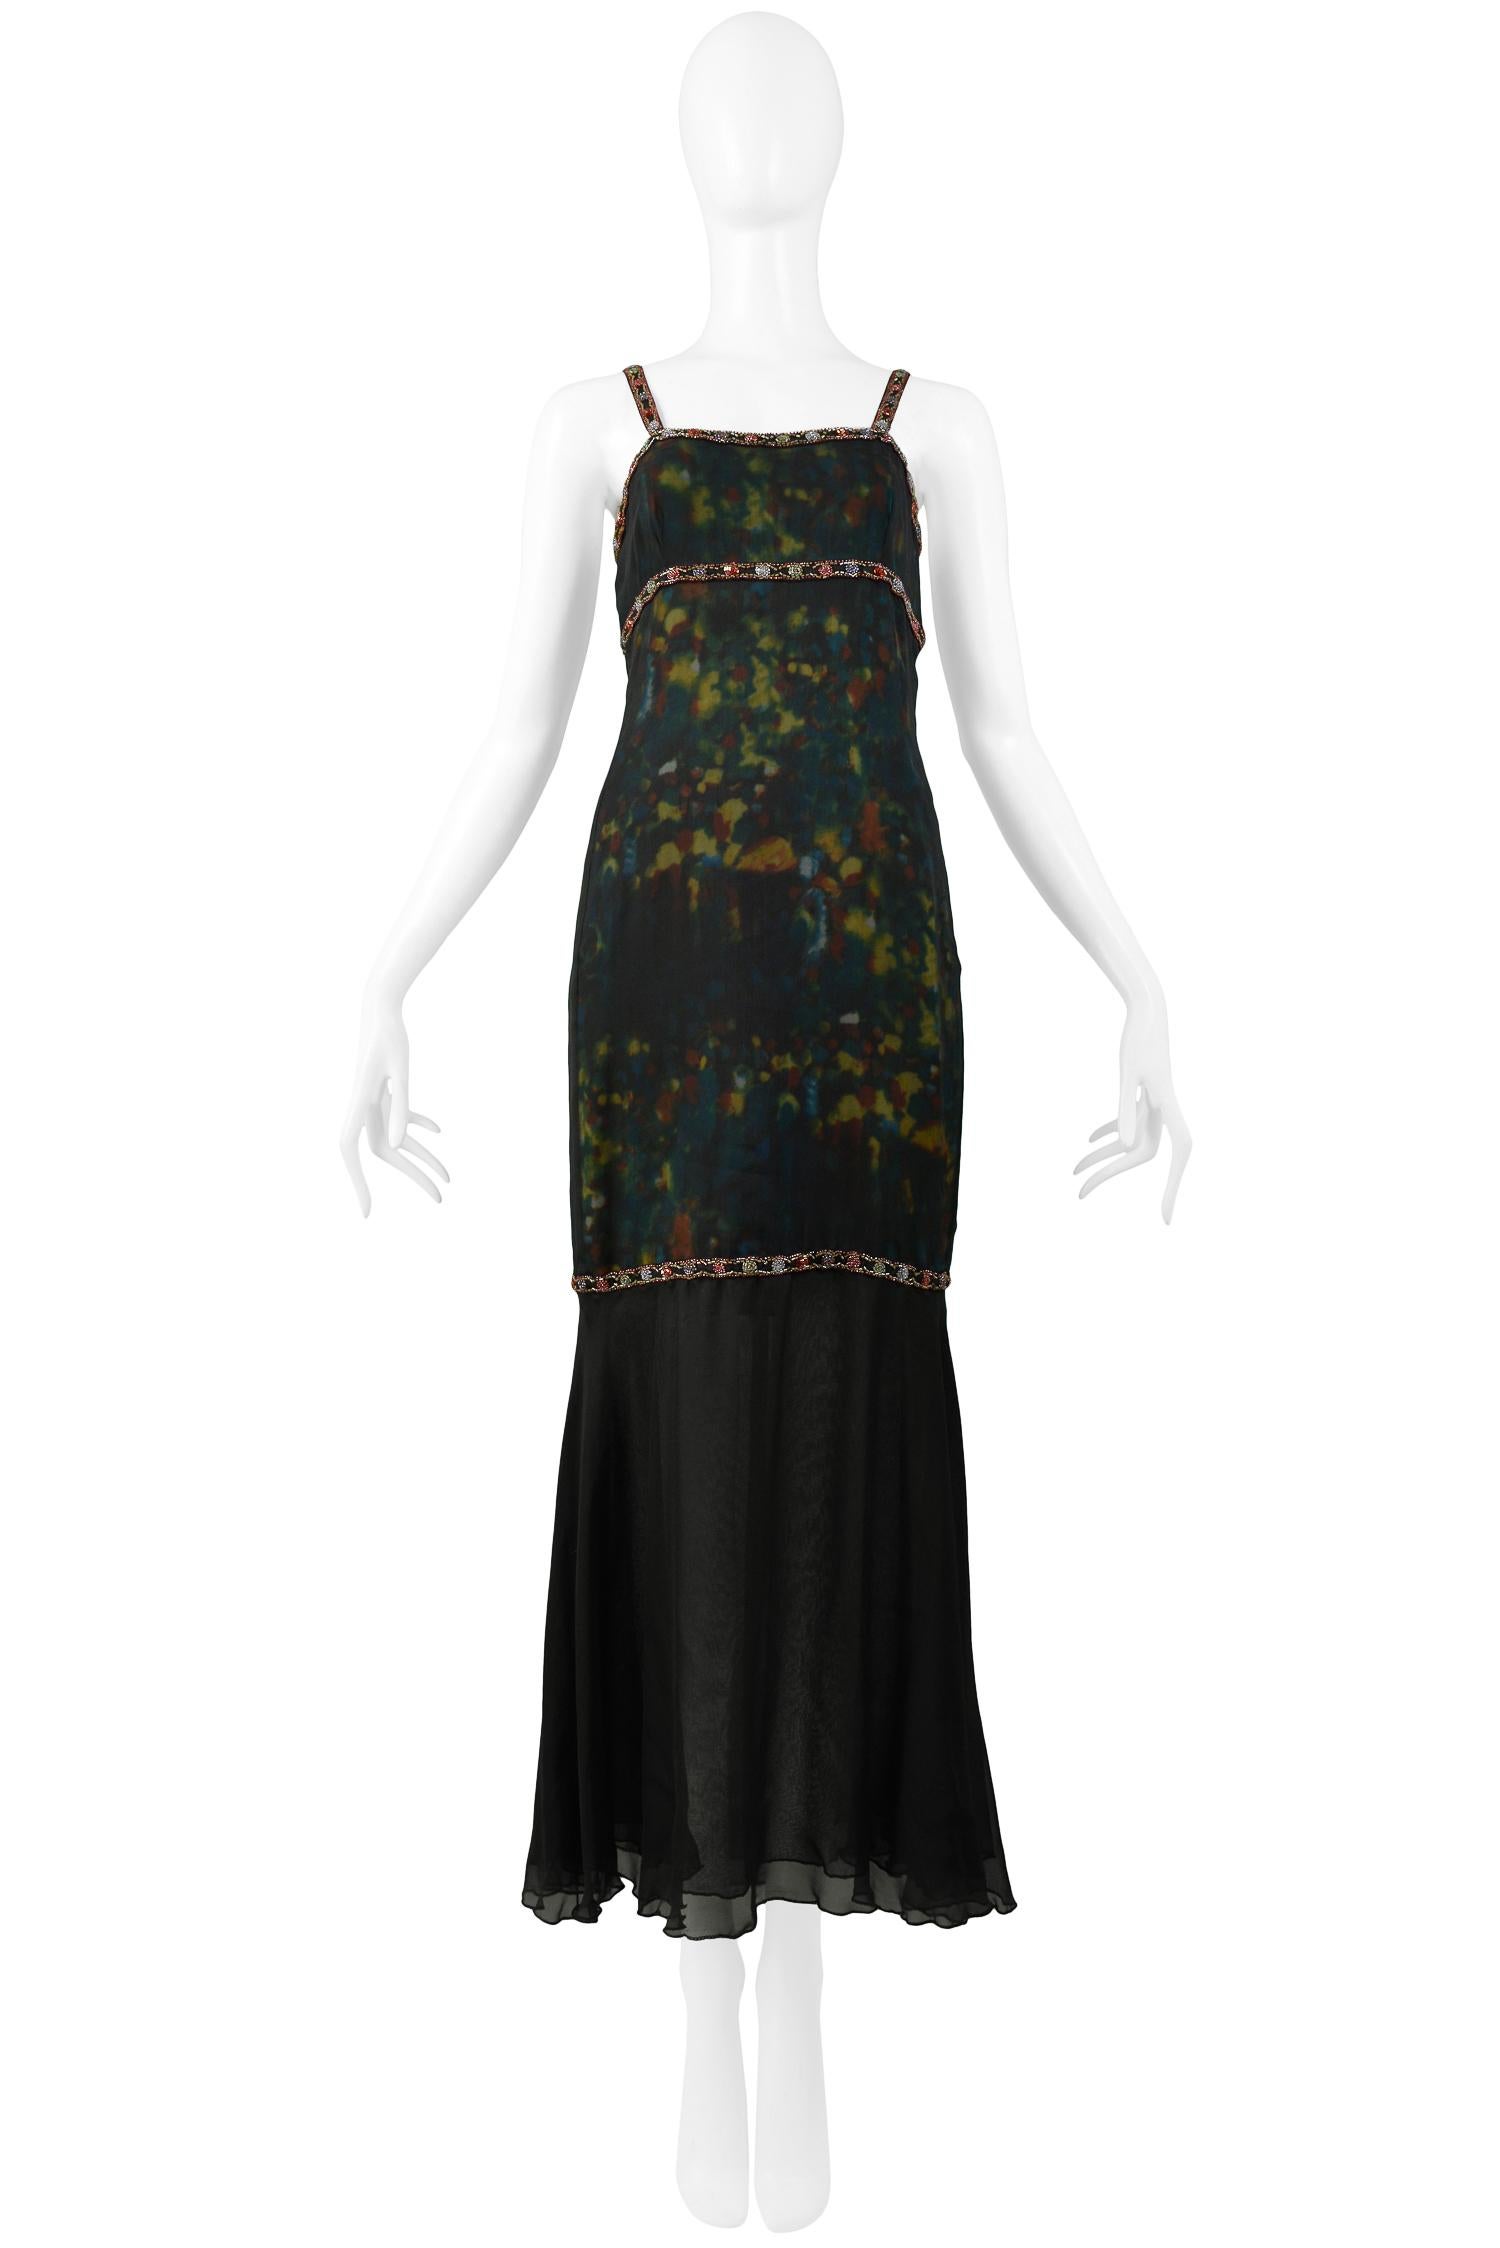 A stunning vintage Chanel by Karl Lagerfeld watercolor beaded gown. The dress features beaded red trim around the bustline and straps, a dark green, red, blue, and gold printed center panel, a black flounce at the hem, and a zipper in the back. From